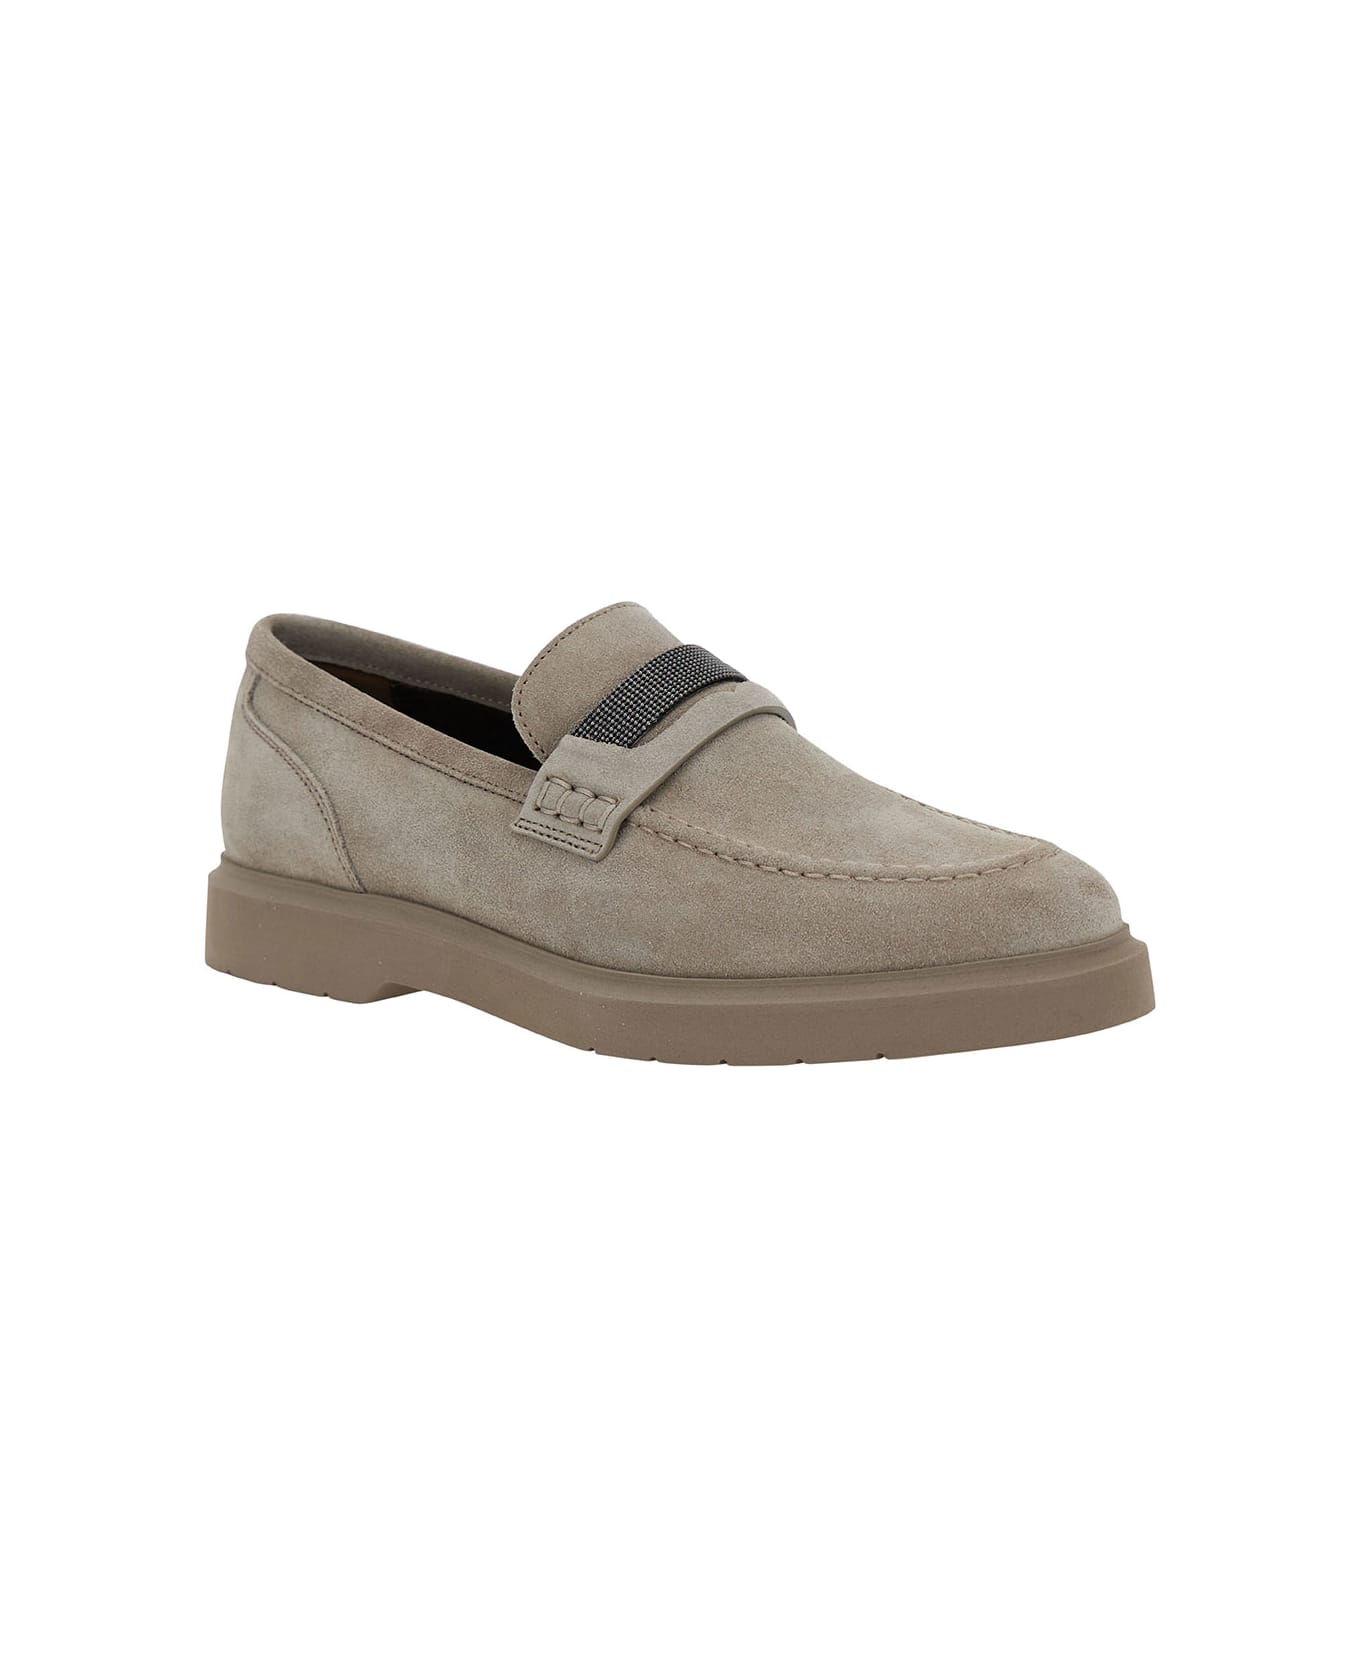 Brunello Cucinelli Grey Loafers With Monile Detail In Suede Woman - Grey